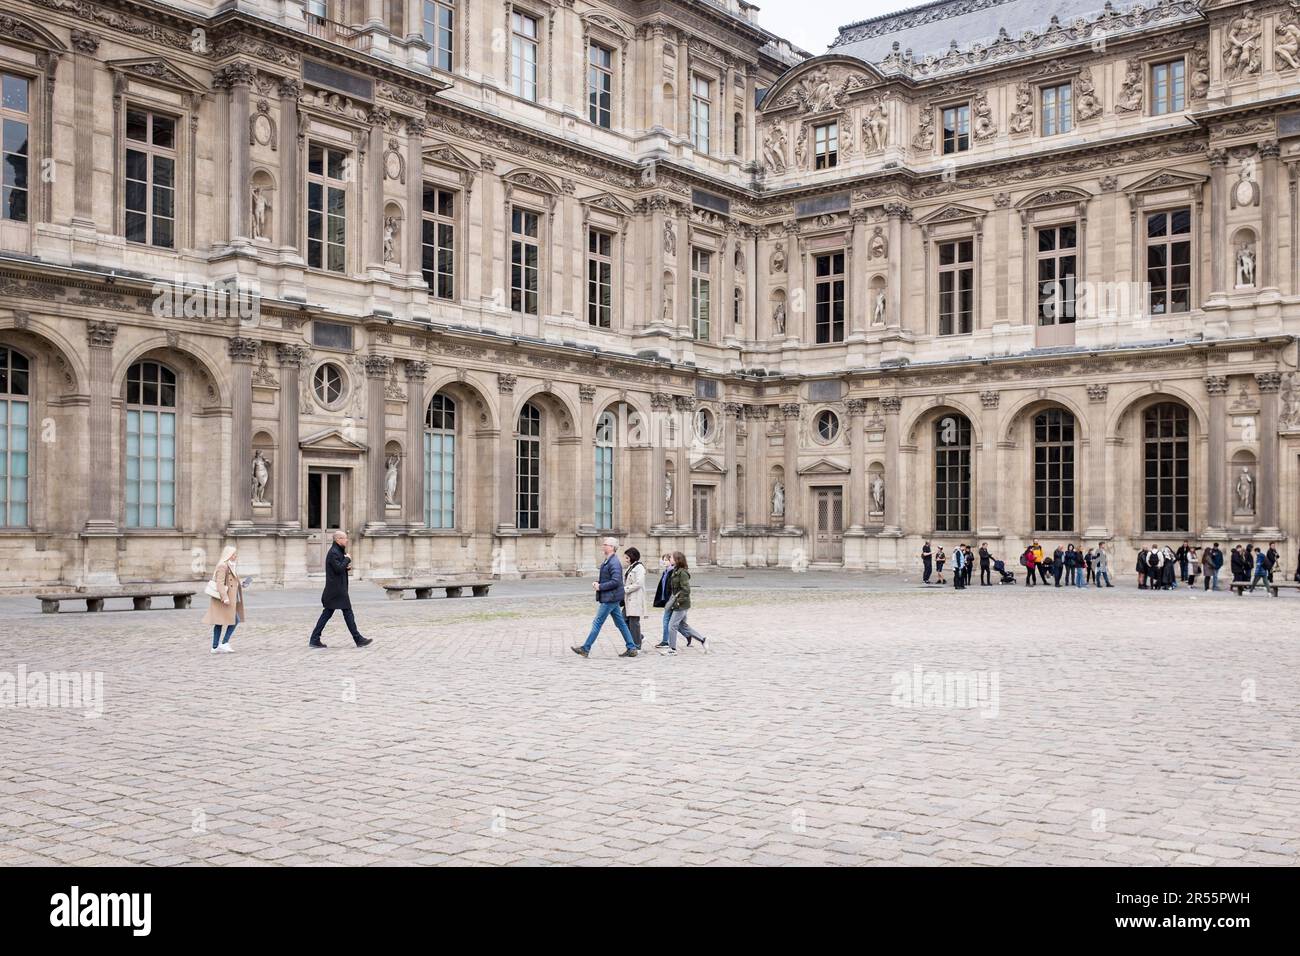 Long lines of visitors in the courtyard of the elegant Palais Royale waiting to enter the Louvre art musuem on a tranquil grey spring day in Paris, France. Amidst a bustling crowd of visitors and tourists, these architectural masterpieces blend modernity and history, inviting exploration and appreciation. Witness the harmonious blend of old and new, as the city's rich cultural heritage comes to life amidst the vibrant energy of a popular travel destination. Stock Photo